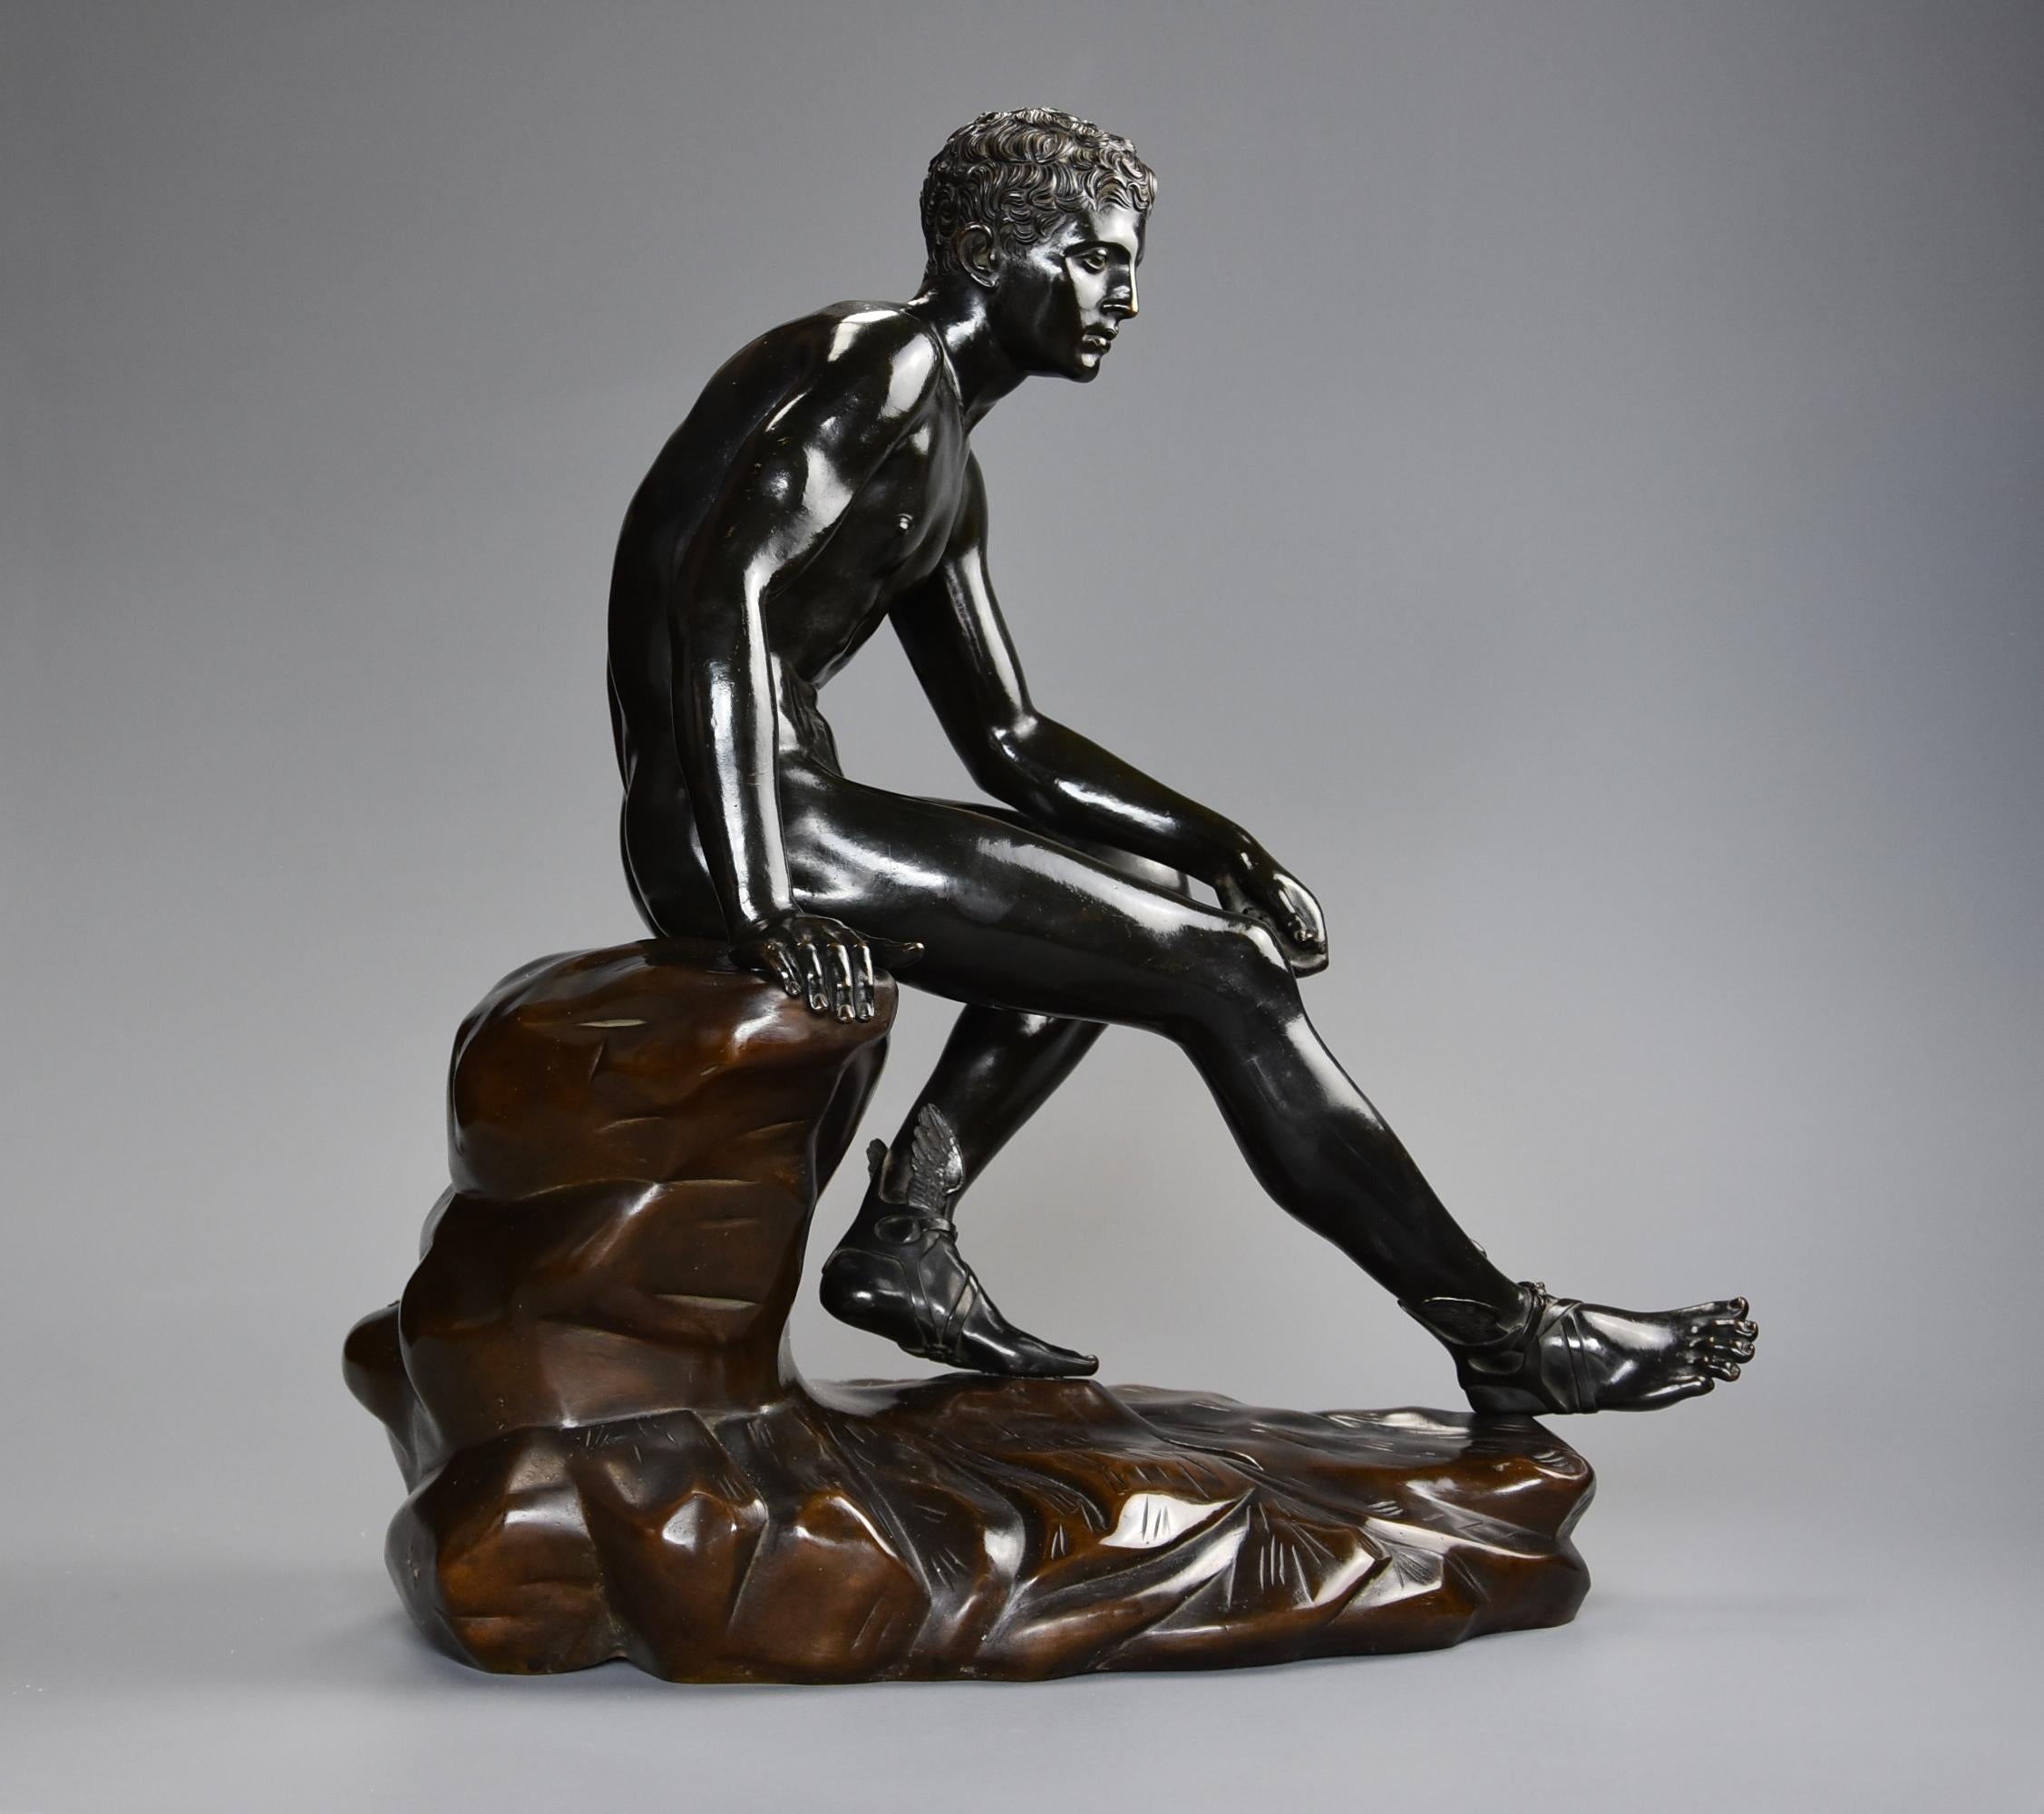 A large late 19th century Grand Tour Italian bronze of 'Seated Hermes', after the Antique, with foundry mark 'Fonderia Artistica, Sabatino Angelis & Fils, NAPOLI', of good patination.

This figure of Hermes (or also known as Mercury) is seated on